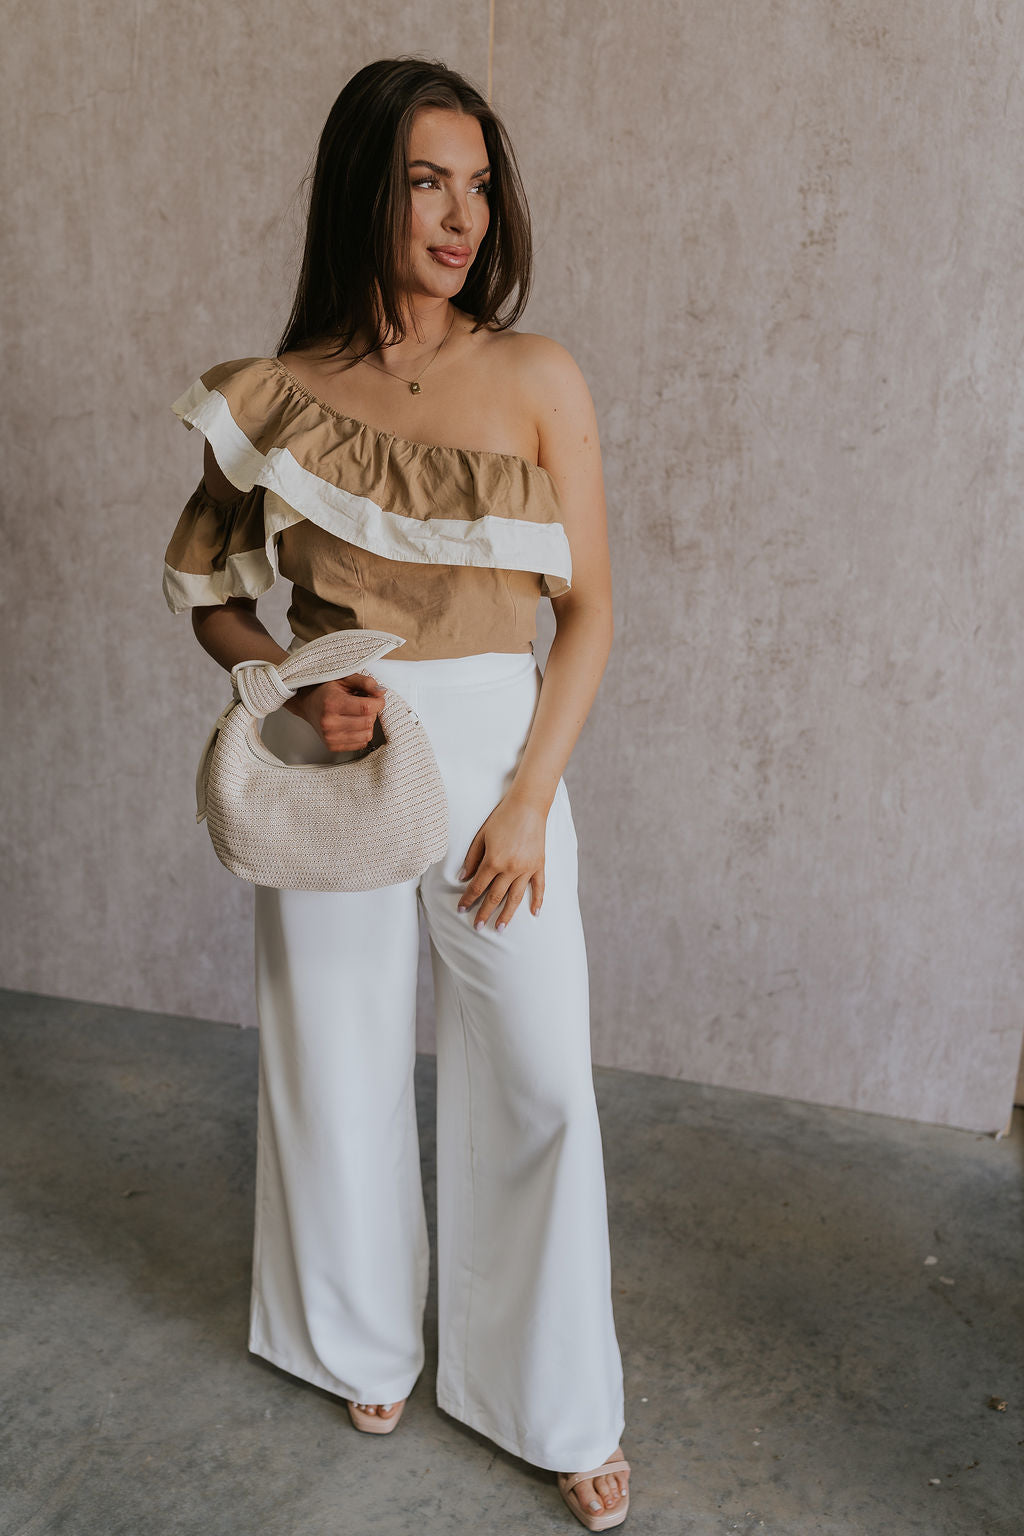 Full body view of female model wearing the Rosalie Khaki & Cream Ruffle One-Shoulder Top which features Brown and Cream Lightweight Fabric, Cropped Waist, Side Zipper with Hook Closure, One-Shoulder Ruffle Strap and Sleeveless 